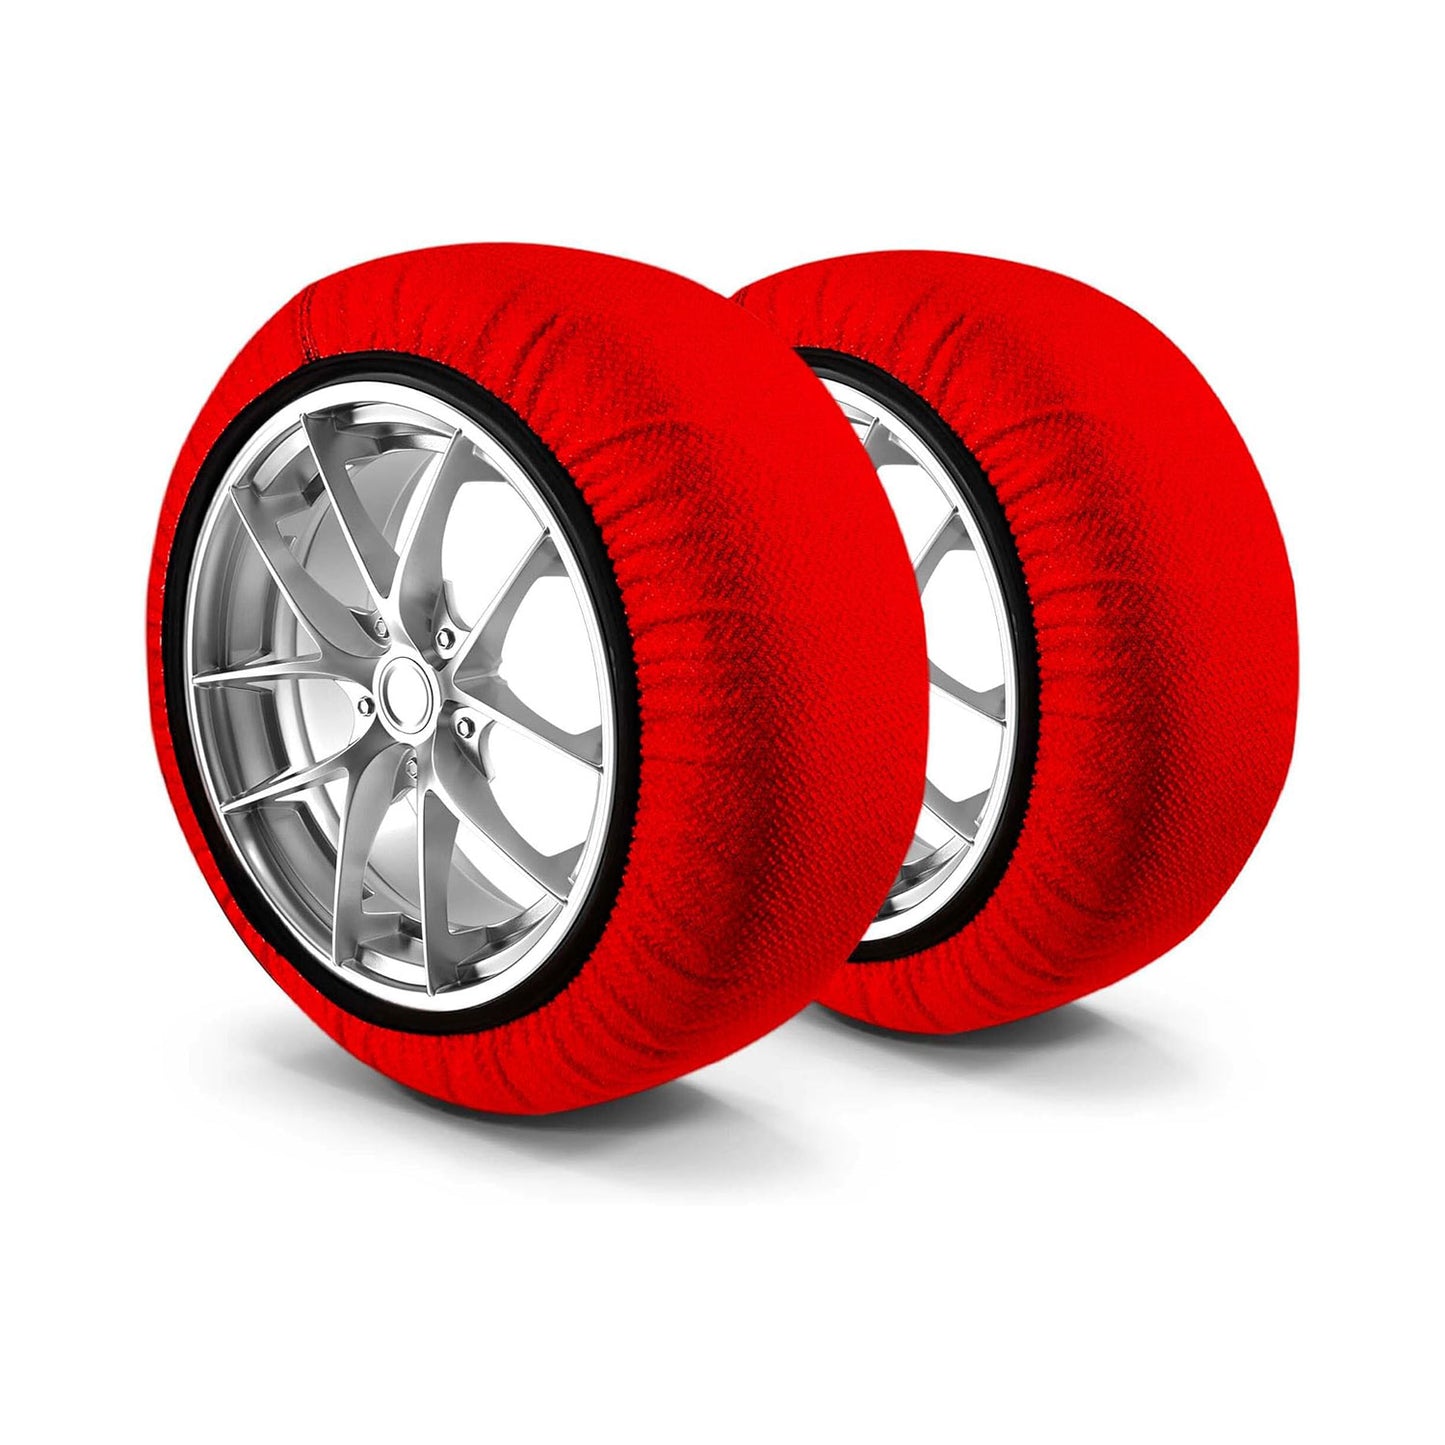 Snow chains from the Walser brand